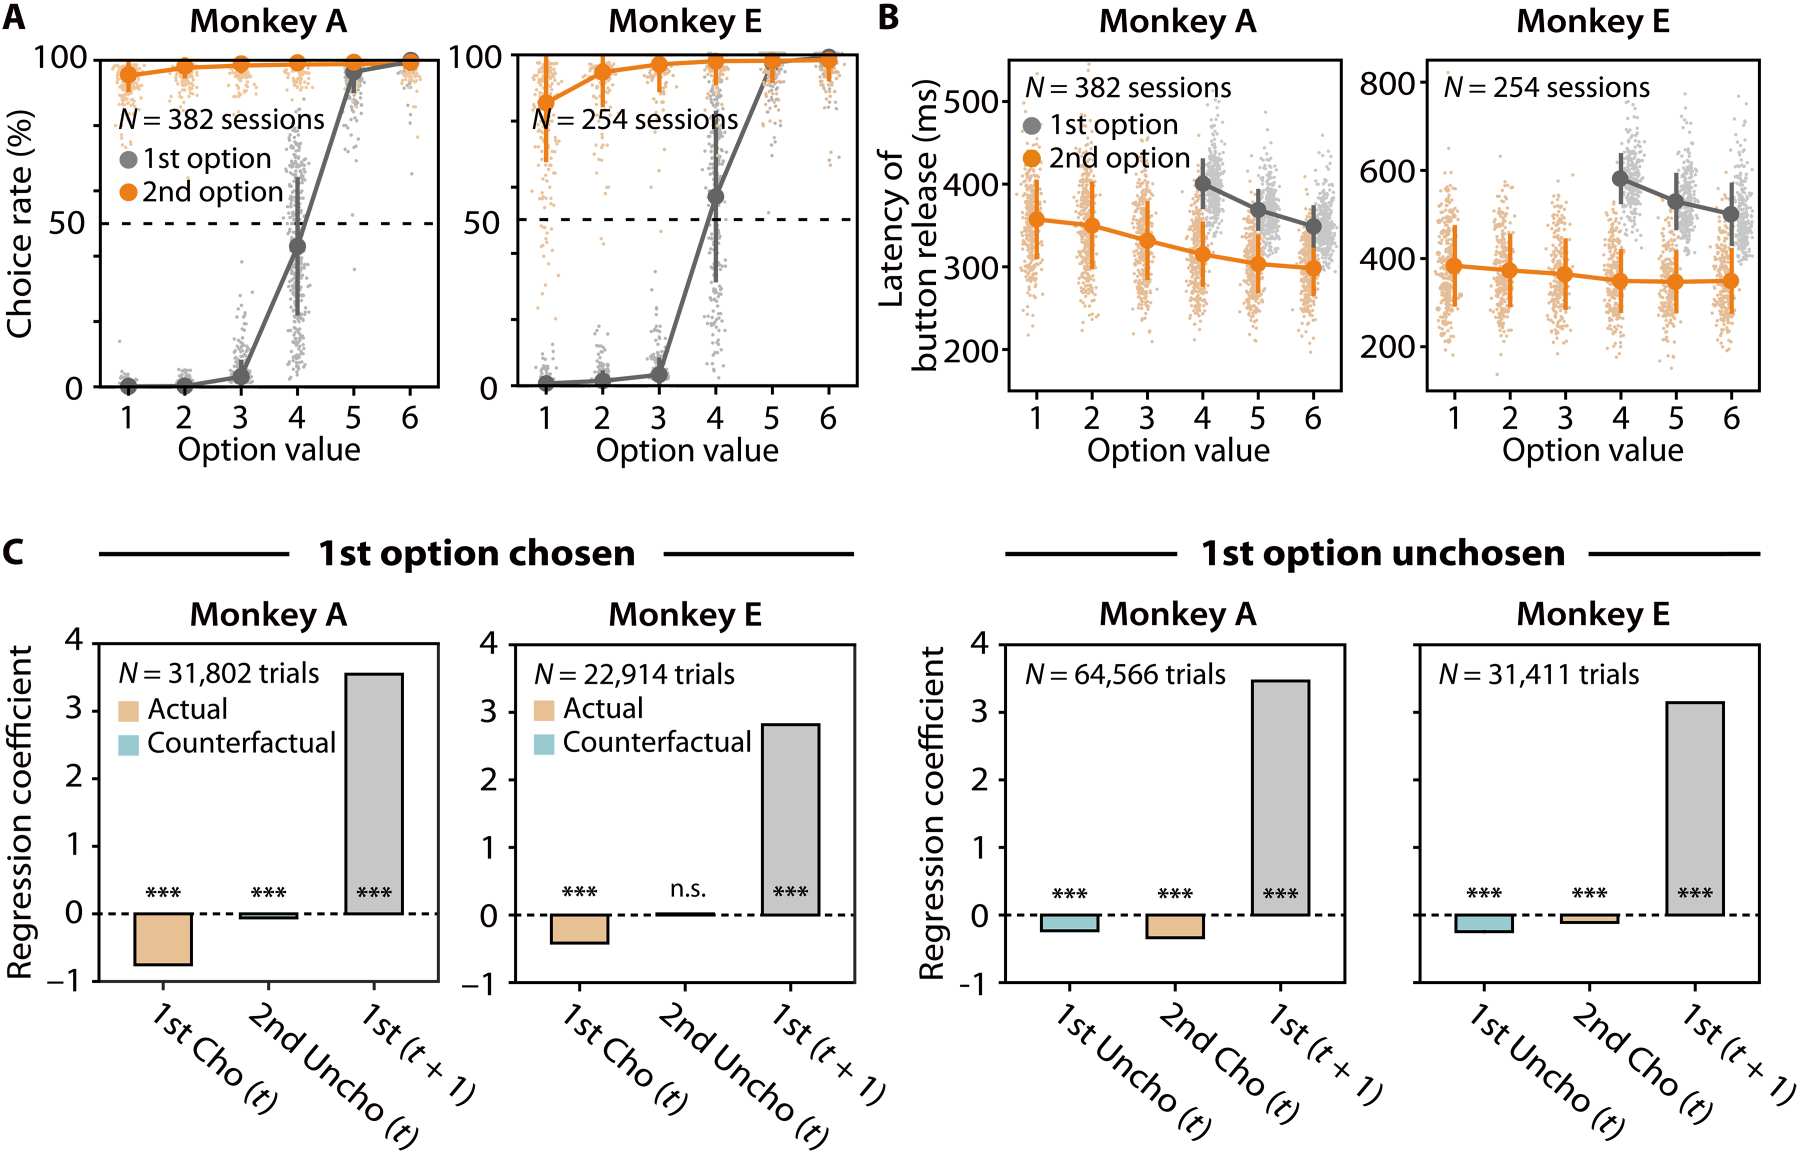 Distinct roles of the orbitofrontal cortex, ventral striatum, and dopamine neurons in counterfactual thinking of decision outcomes 이미지